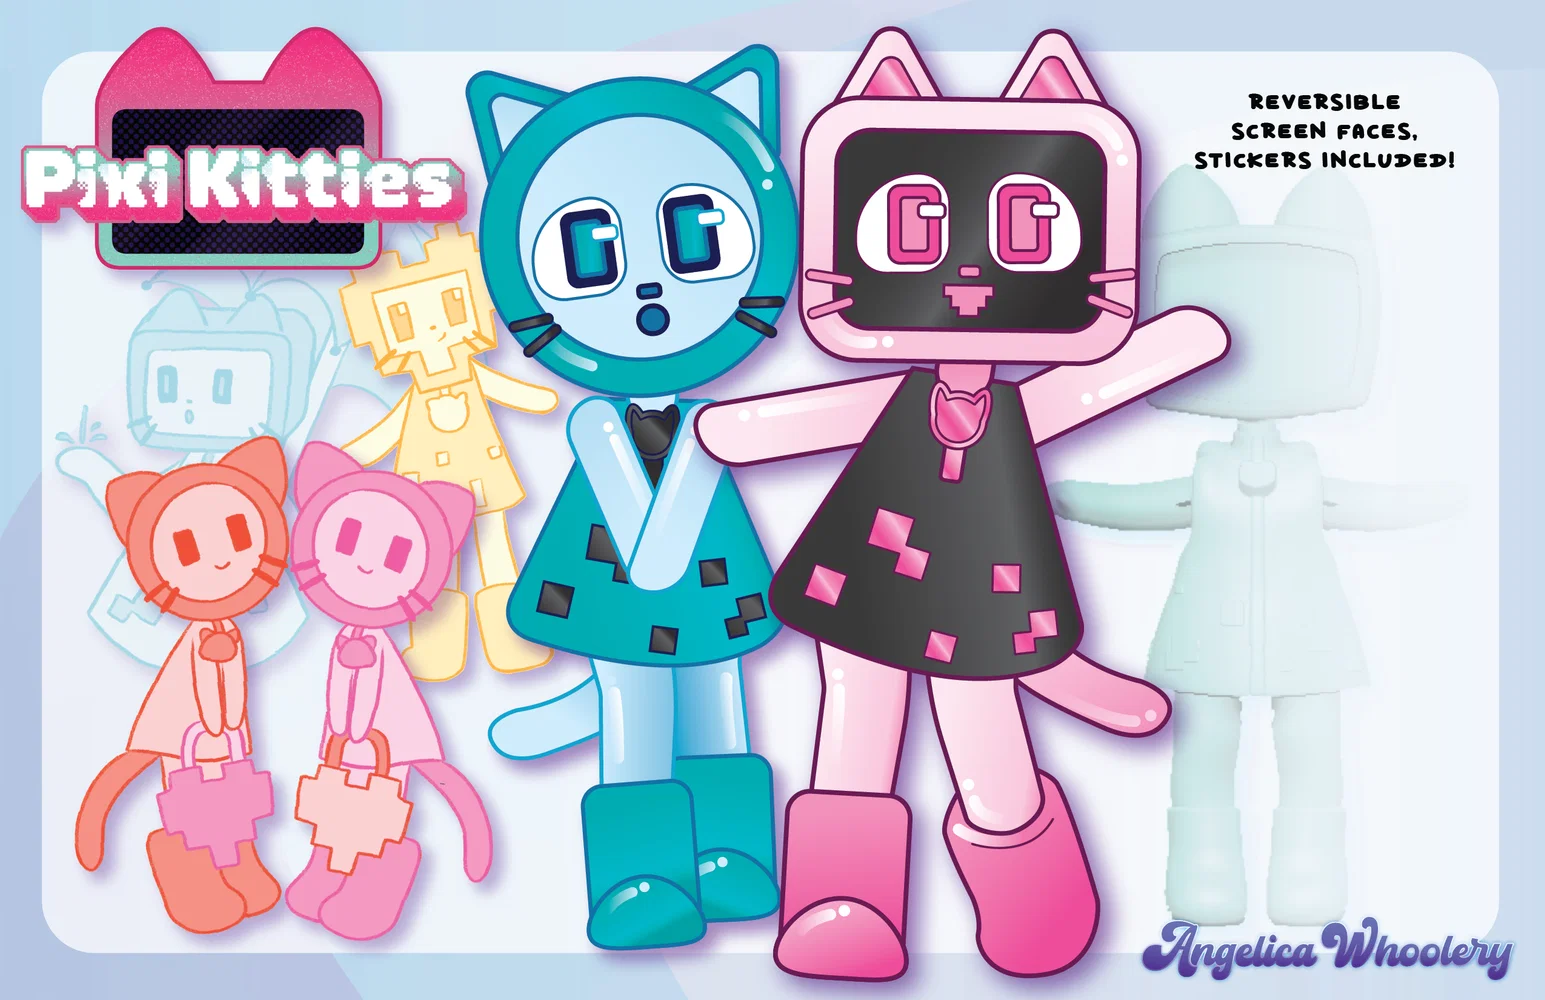 PixiKitties, a line of collectible figures themed after both digital screens and cats.